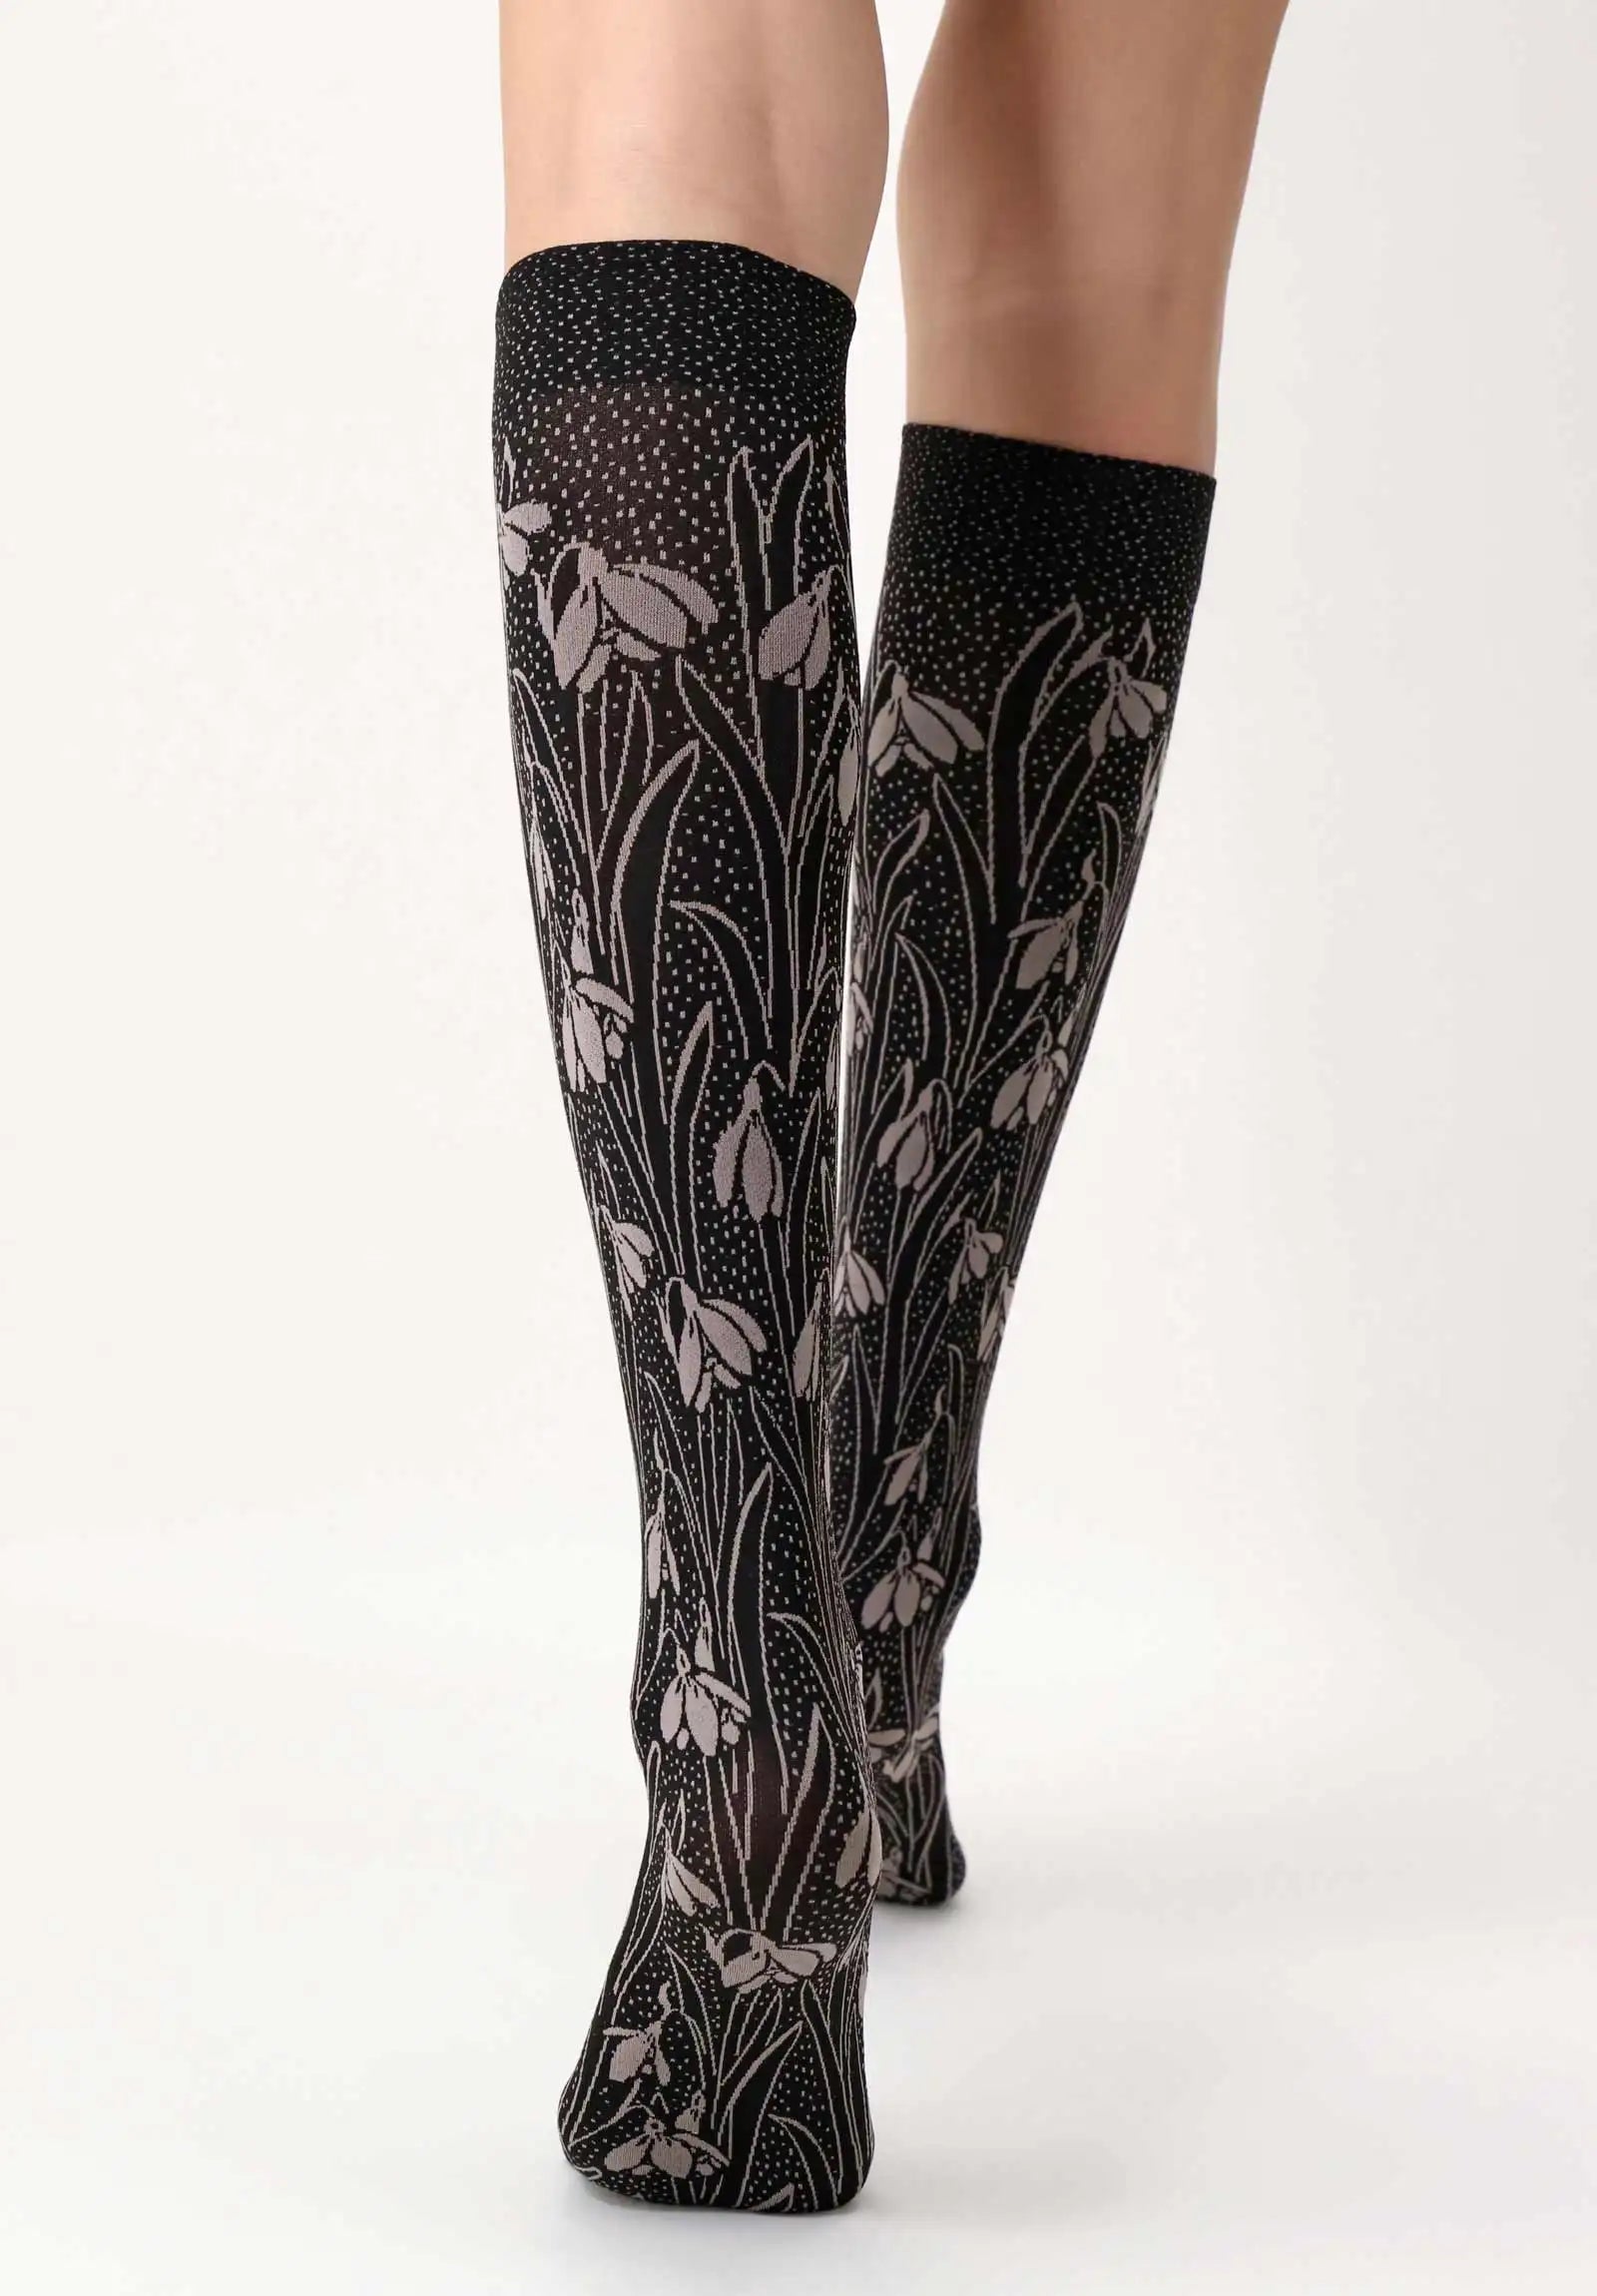 Oroblù I Love First Class Flowers Knee-highs - Black opaque fashion knee-high socks with a beige snowdrop style floral pattern with speckled background.